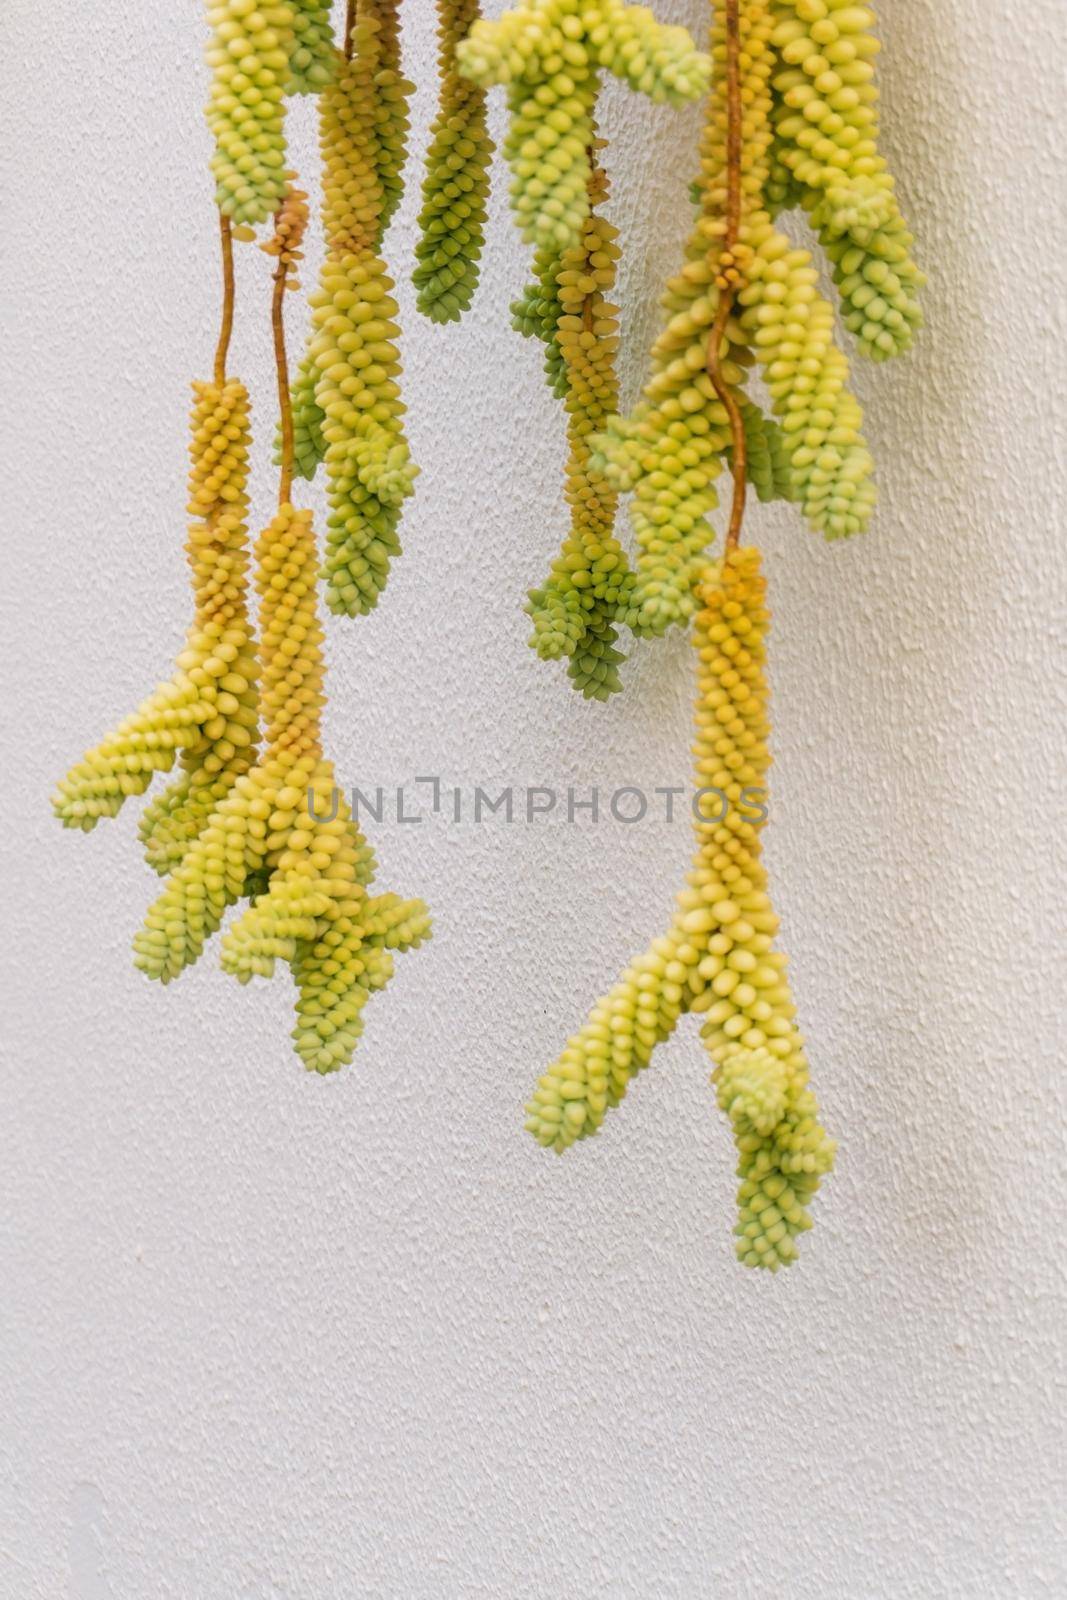 Yellow - green trailing stems of succulent sedum morganianum on a white textured background